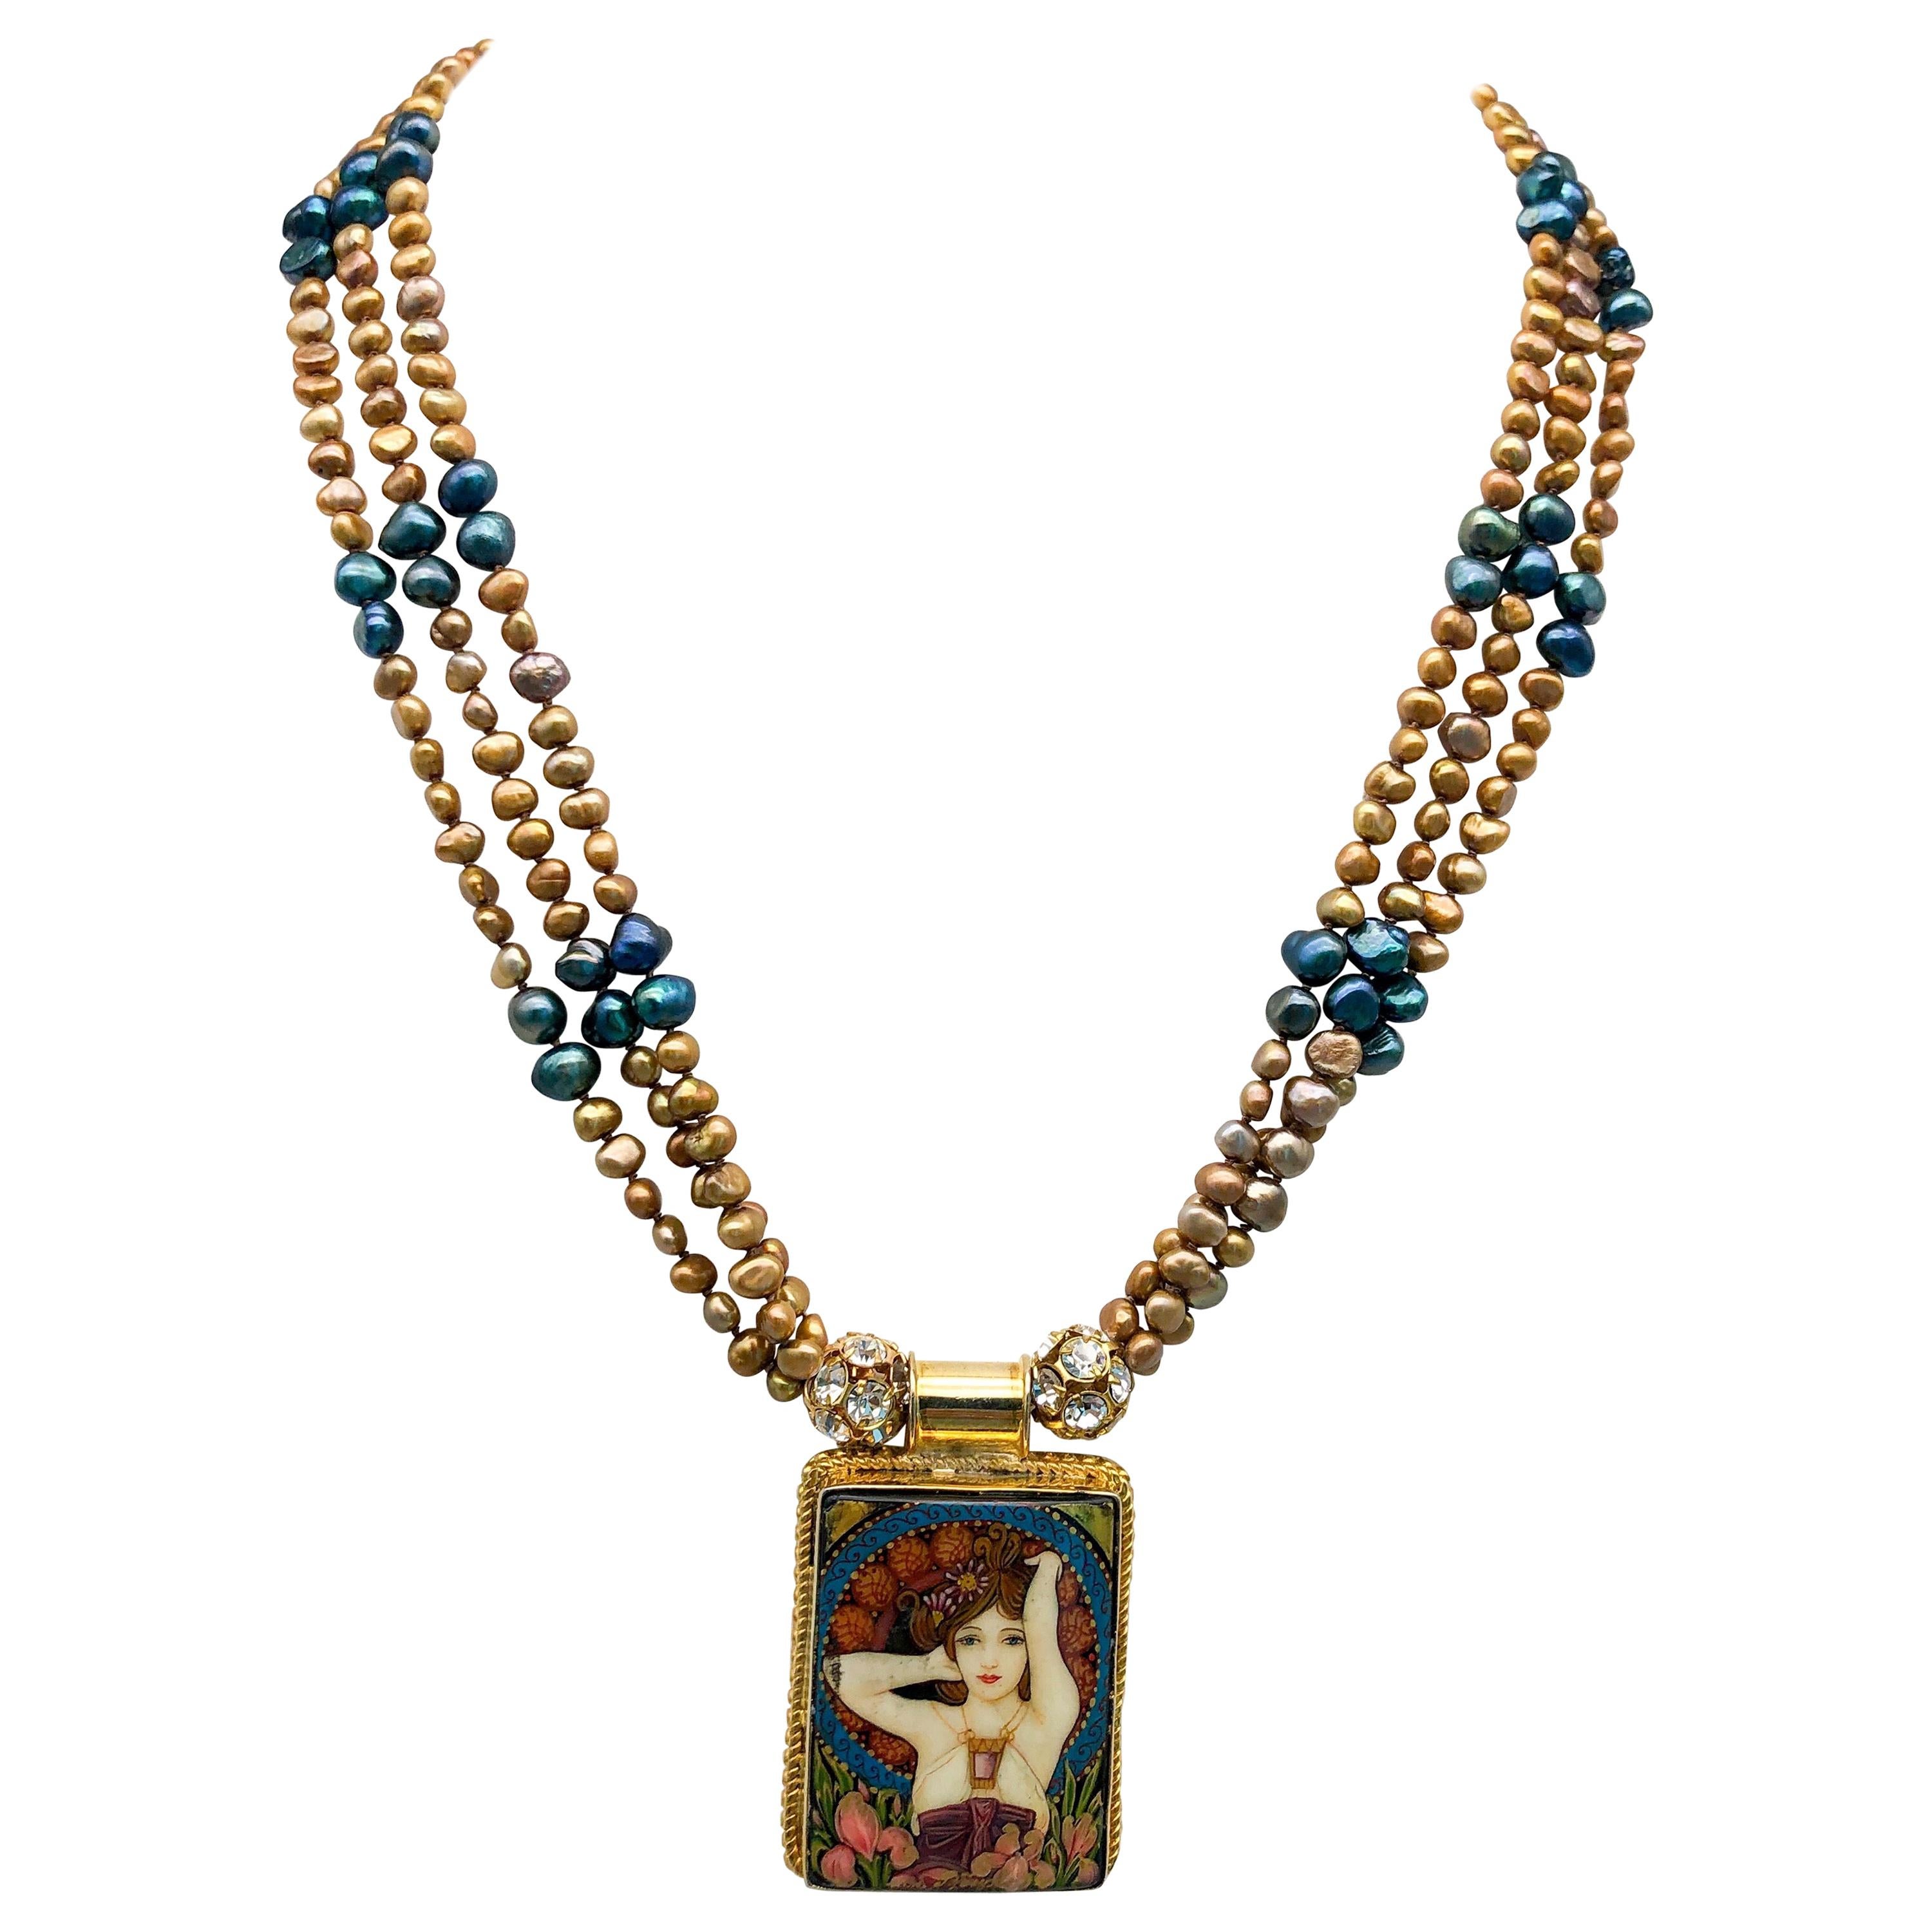 One-of-a-Kind
This exquisite pendant necklace is a true masterpiece in the style of the renowned artist Gustav Klimt. The pendant boasts intricate detailing and a rich color palette, measuring an impressive 2 1/2 x 2